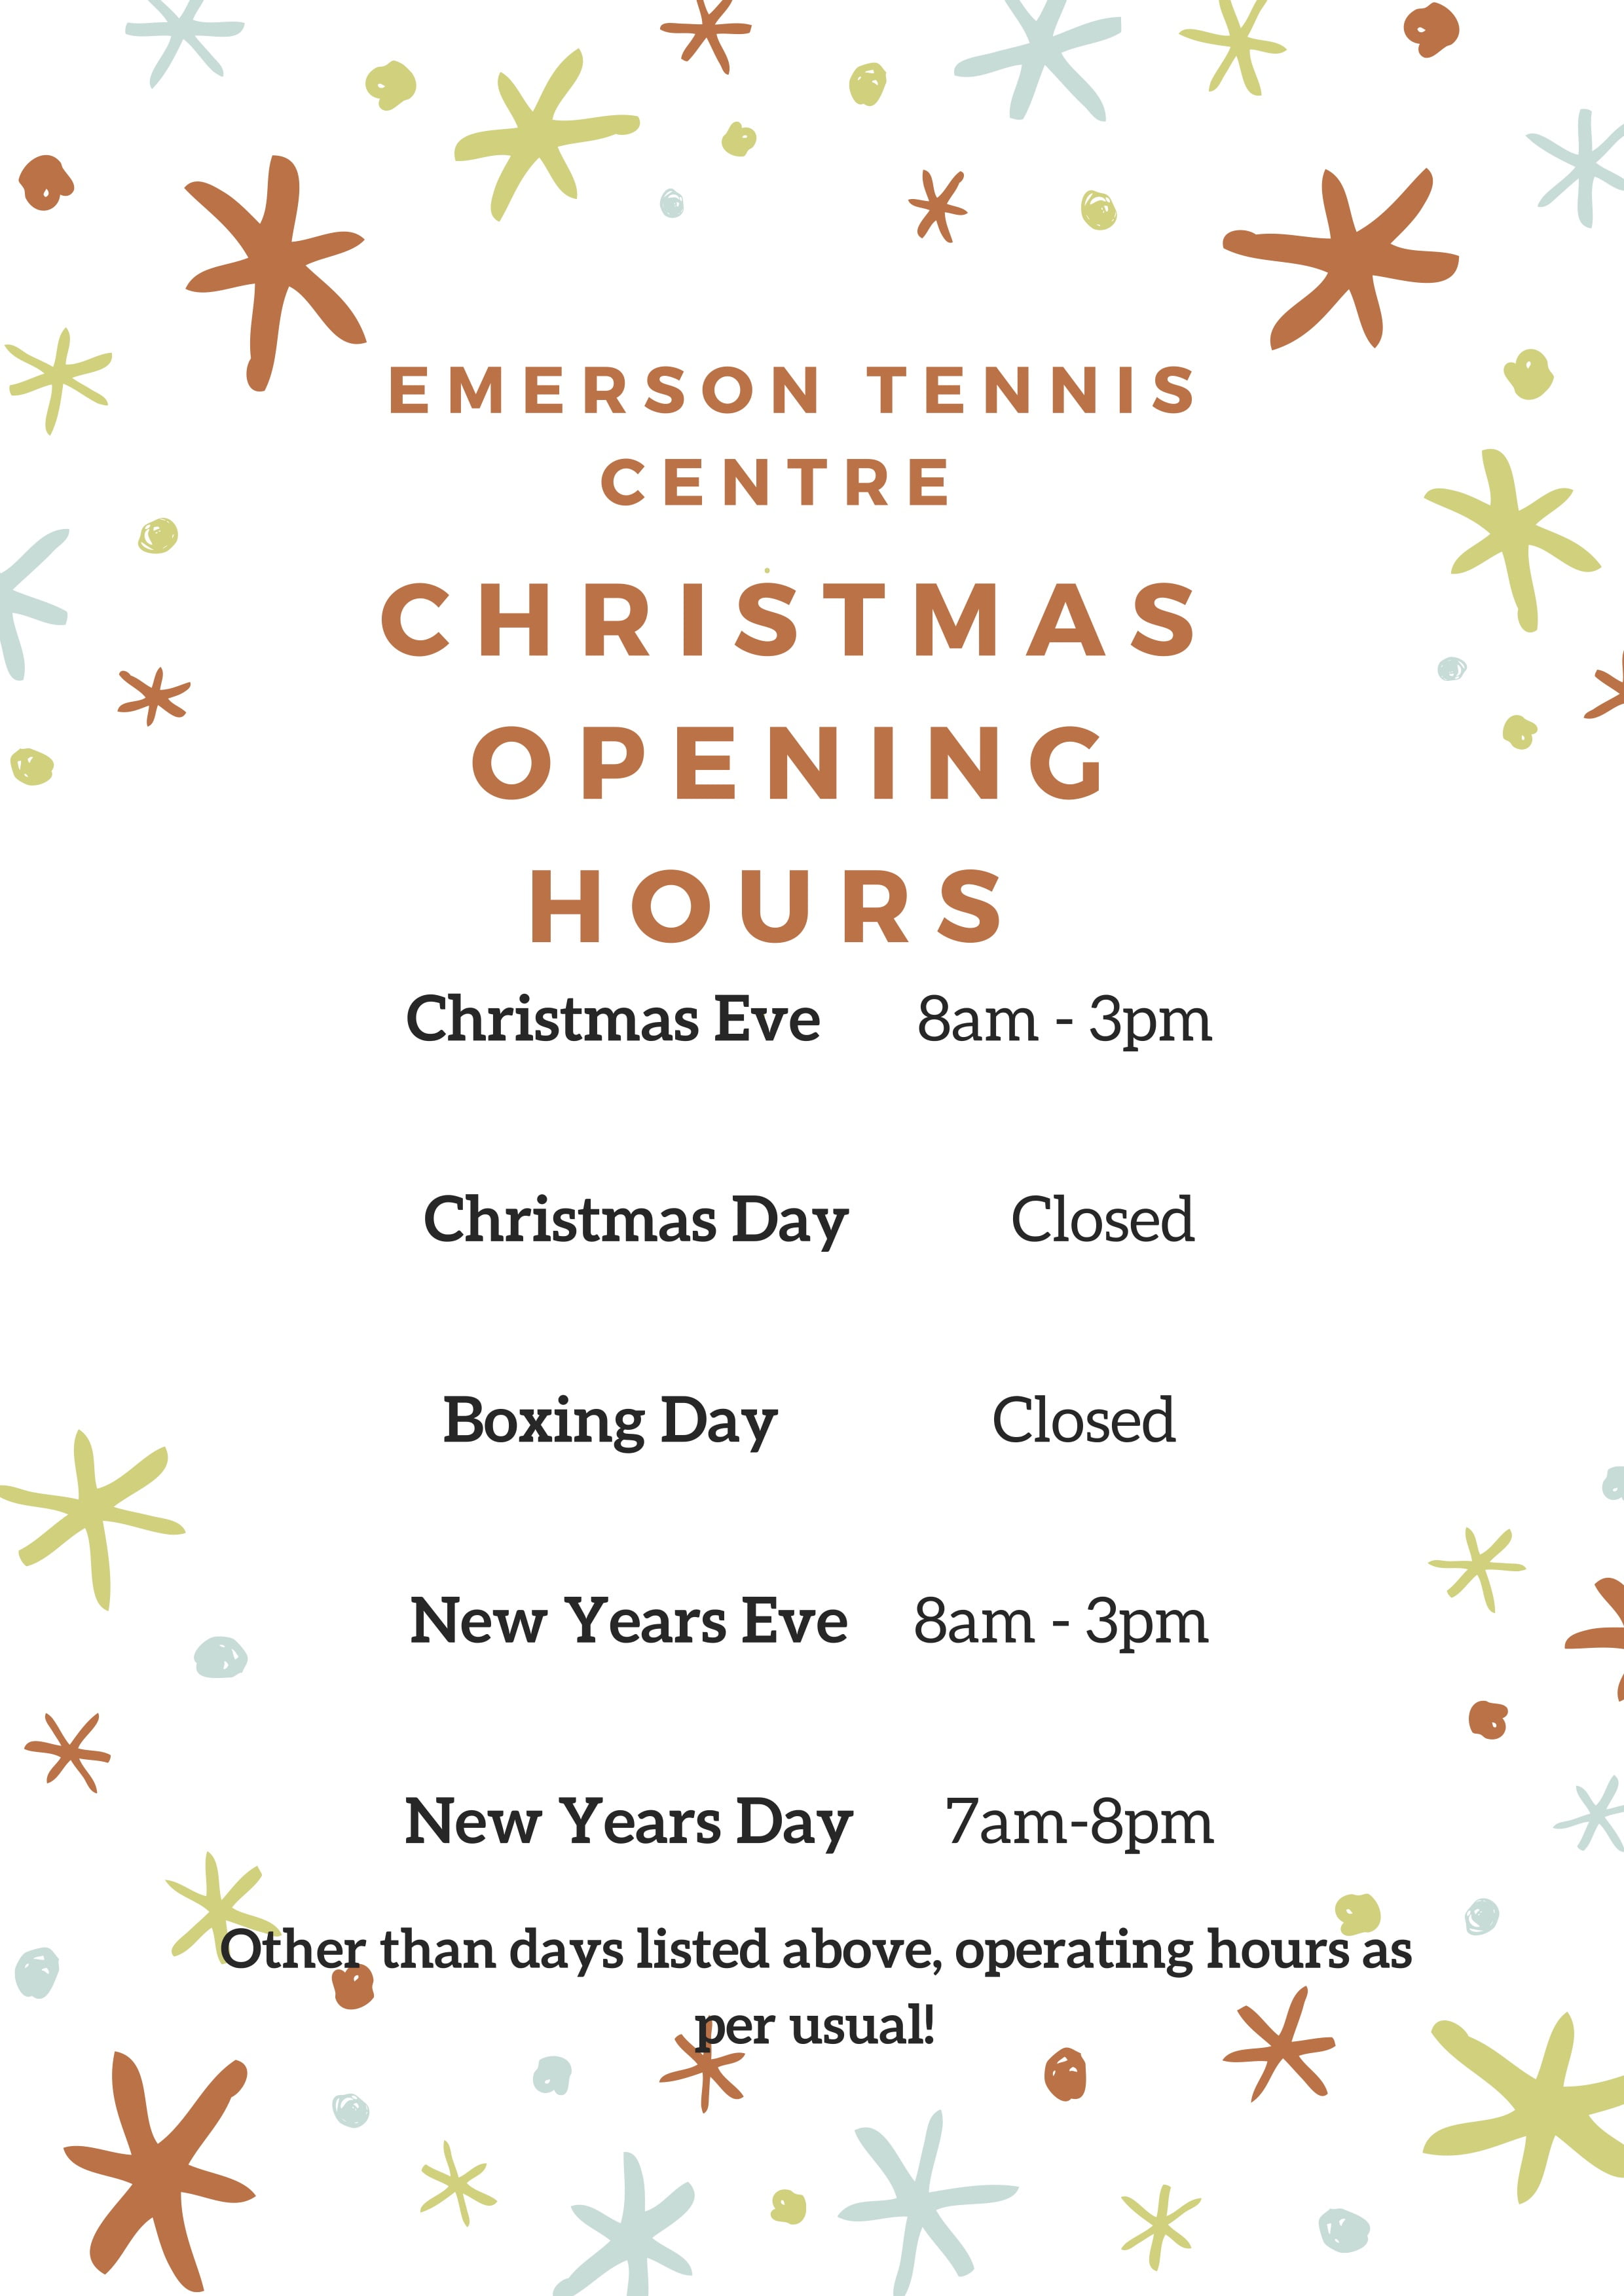 christmas-opening-hours-updated-copy-roy-emerson-tennis-centre